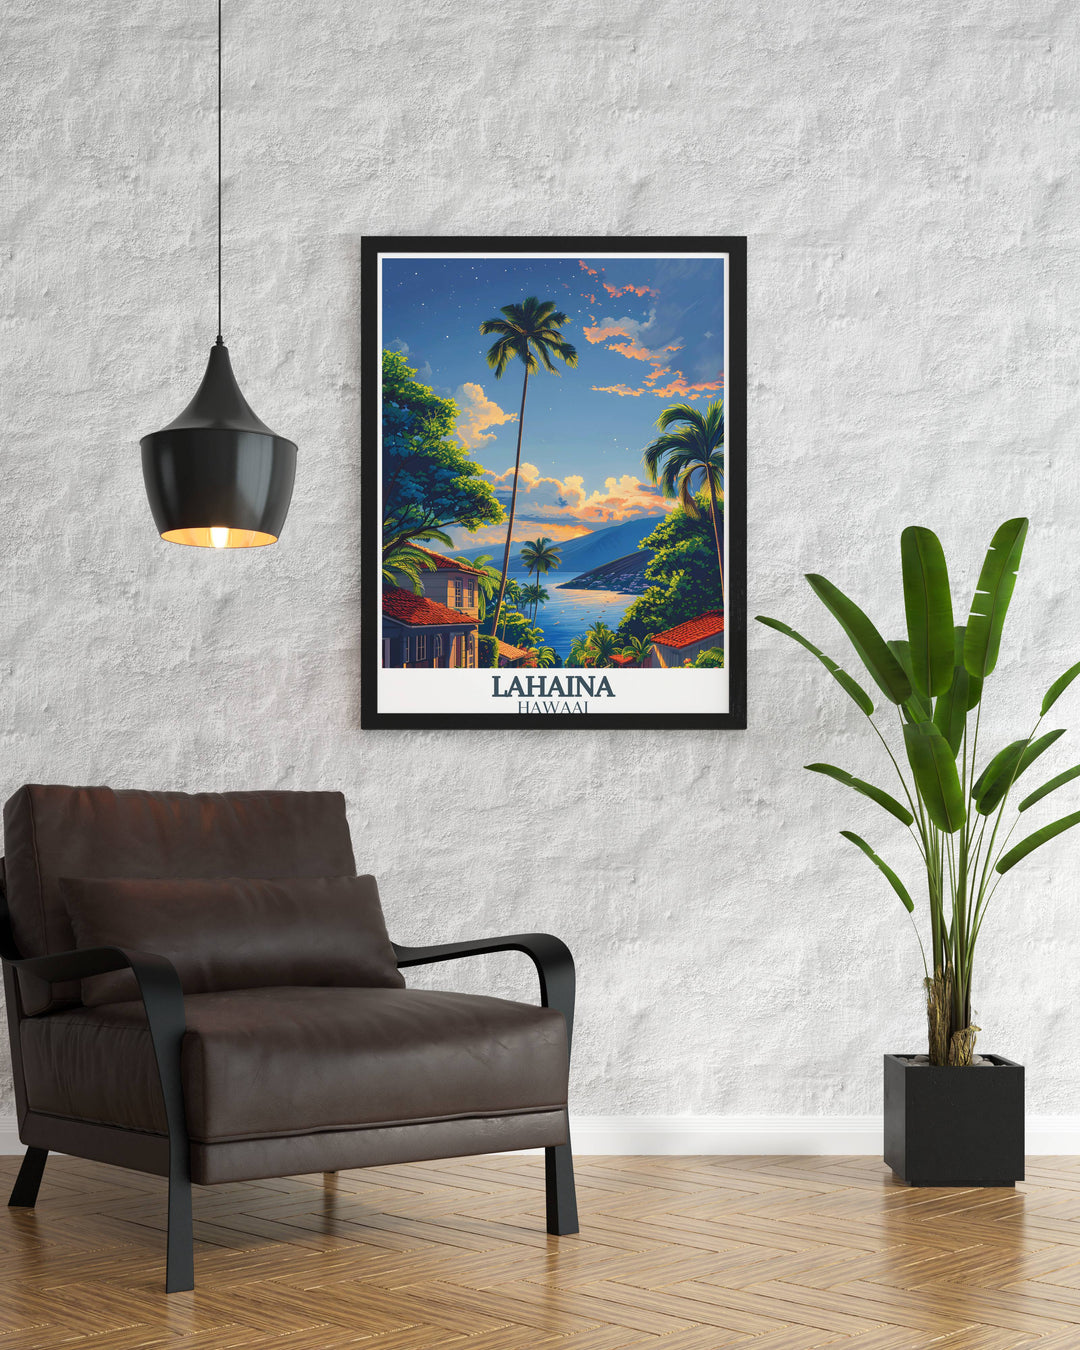 Exquisite Lahaina Hawaii art print that brings a piece of the island's spirit into your home or office, with vivid colors and authentic Hawaiian scenes.